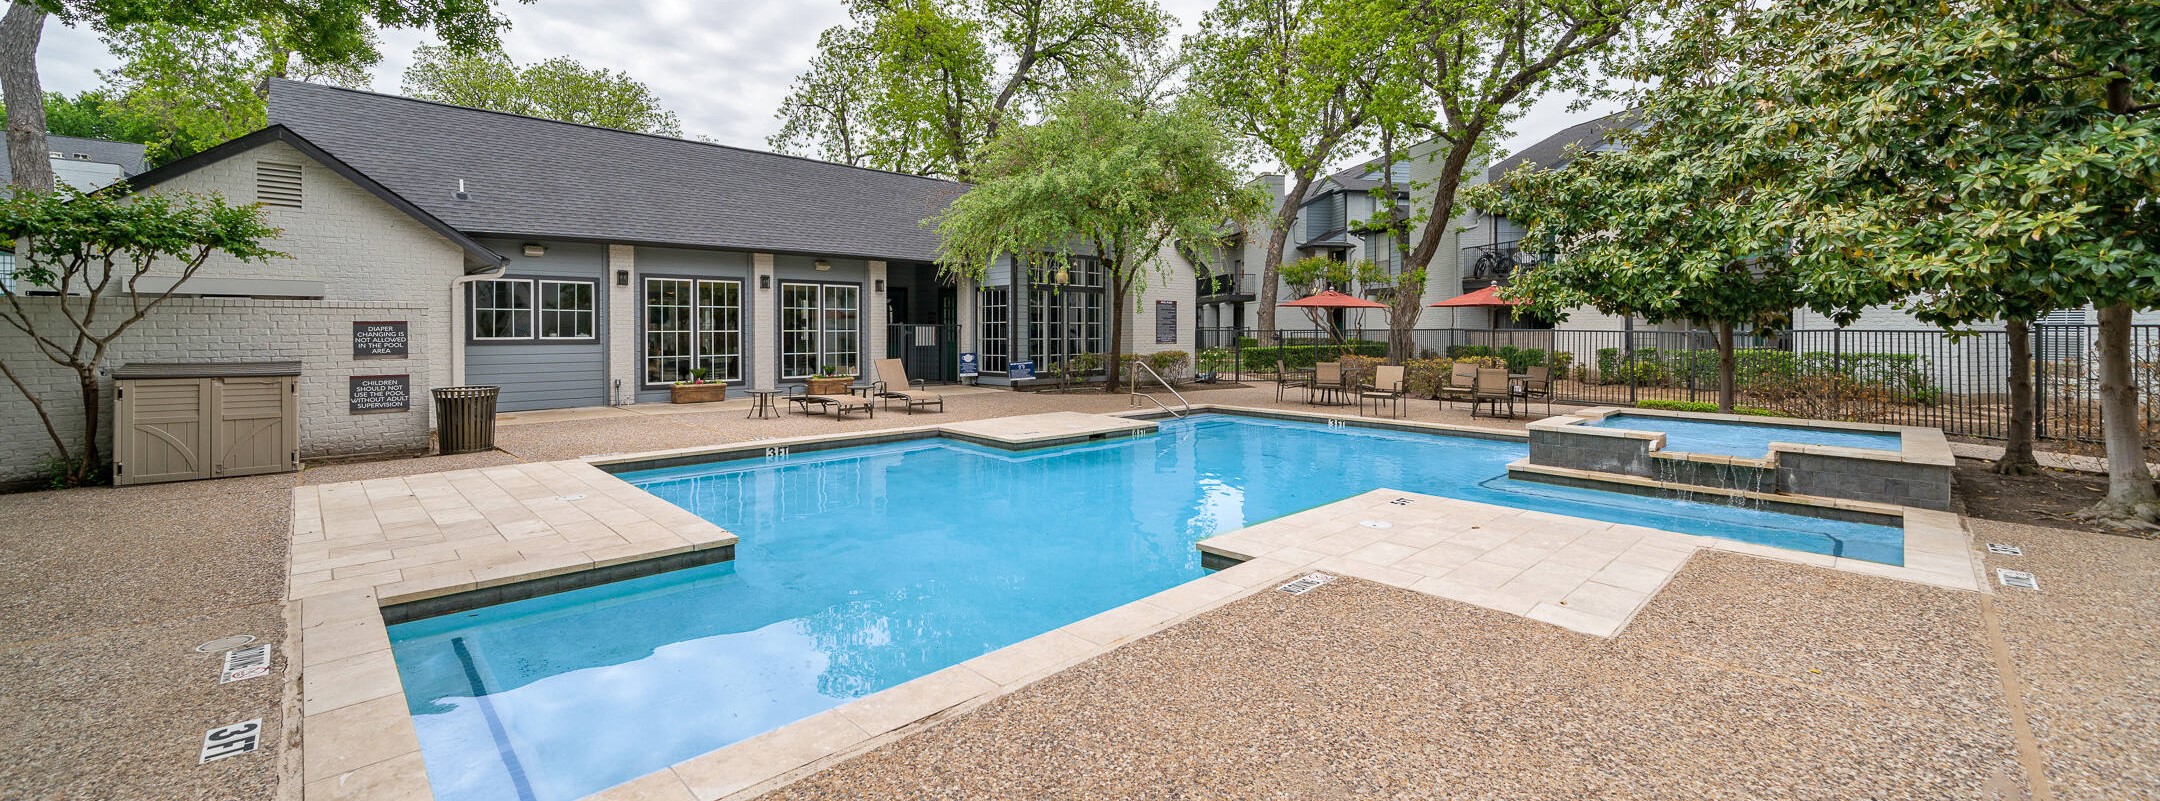 Architectural Pool & Spa in Westmount at River Park Apartments